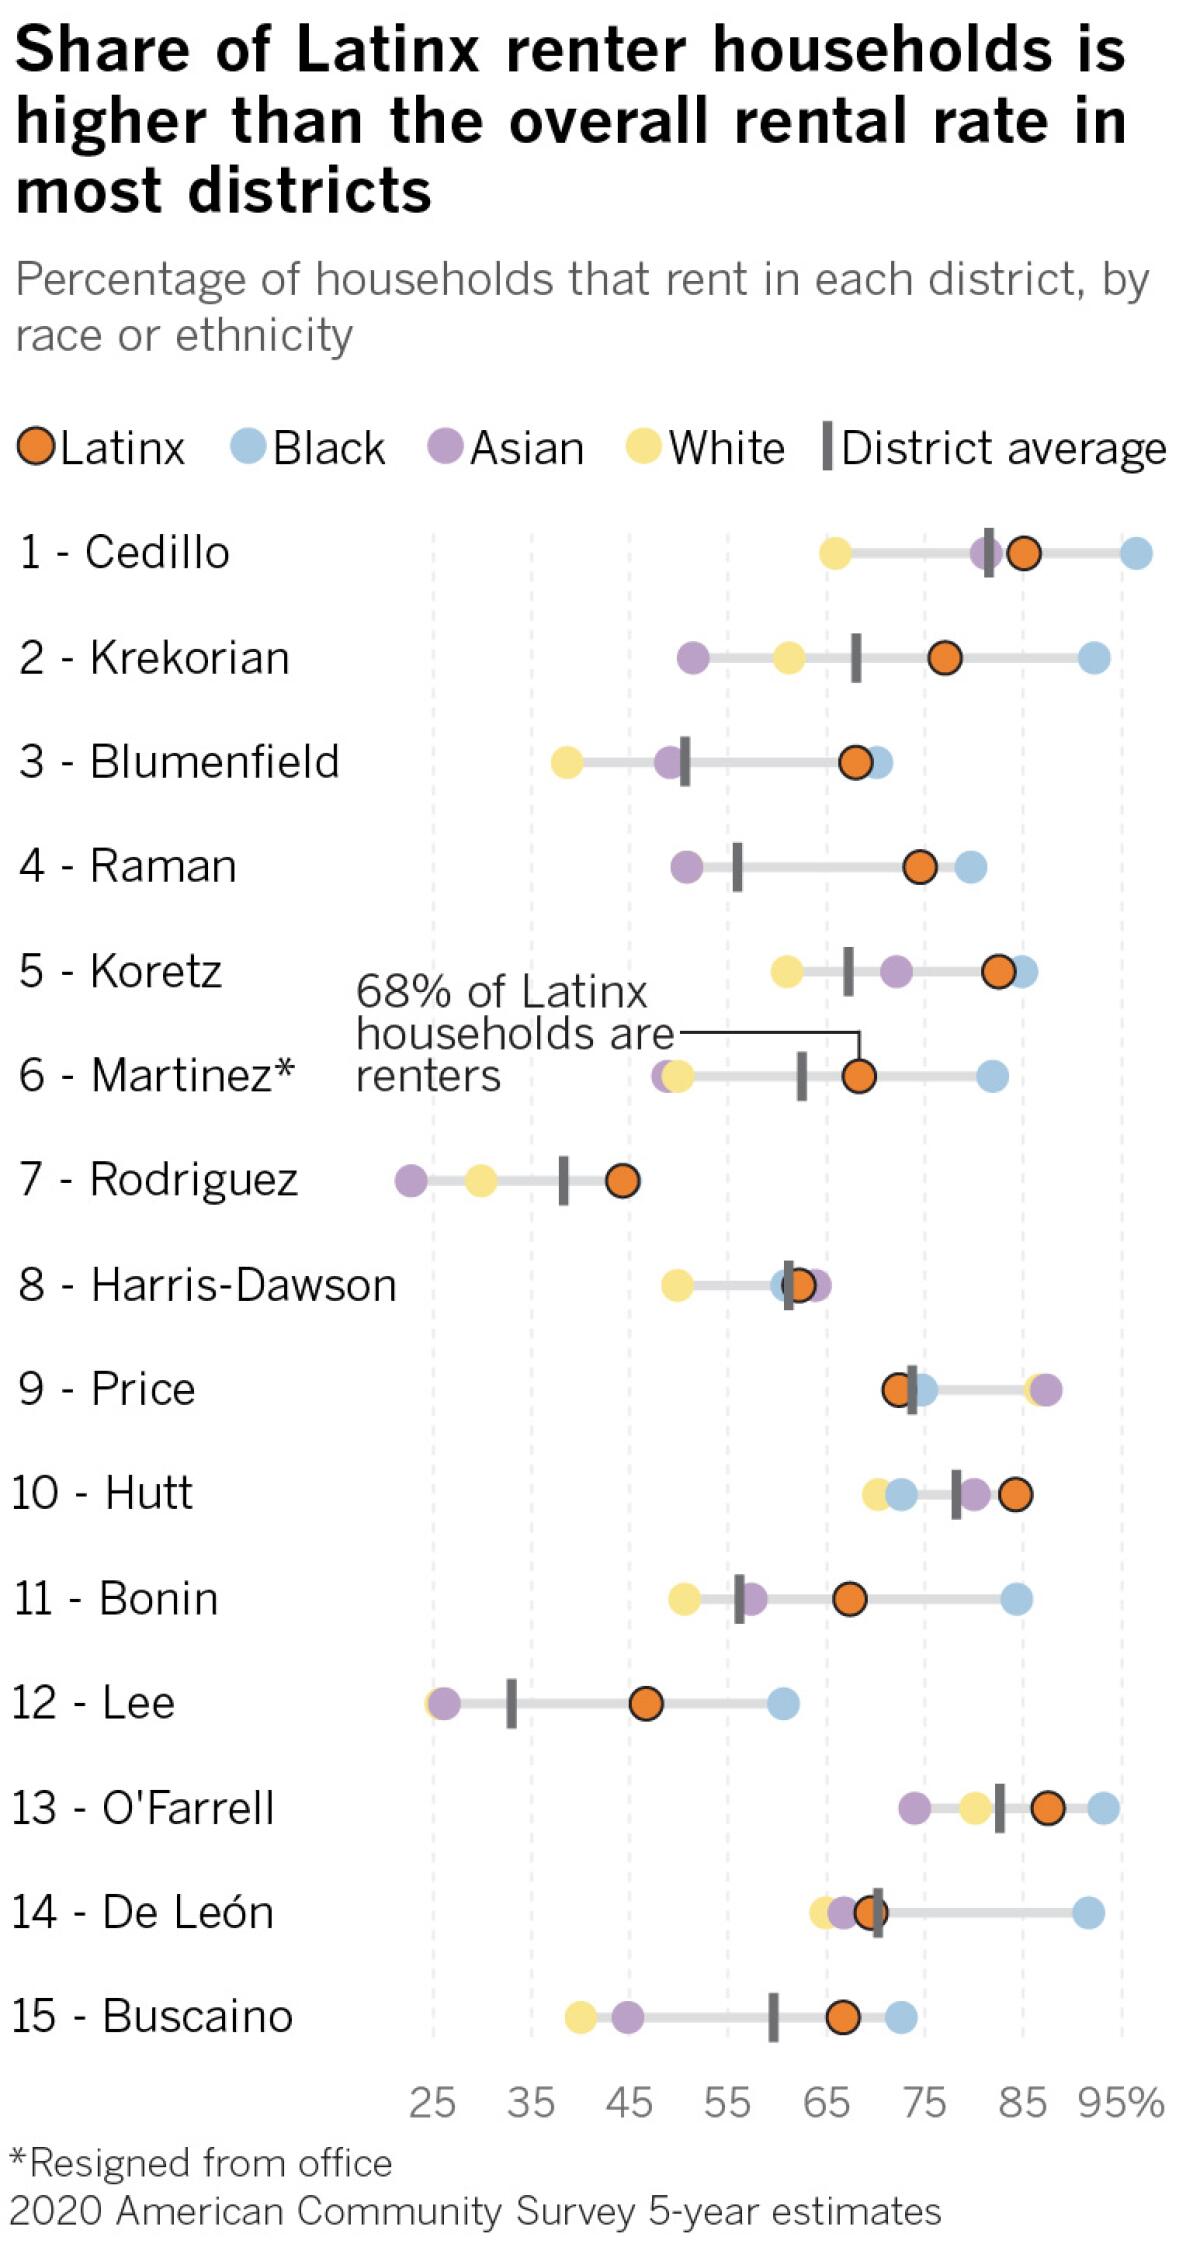 A horizontal dot plot showing the percentage of households that rent in each L.A. city council district, by race or ethnicity